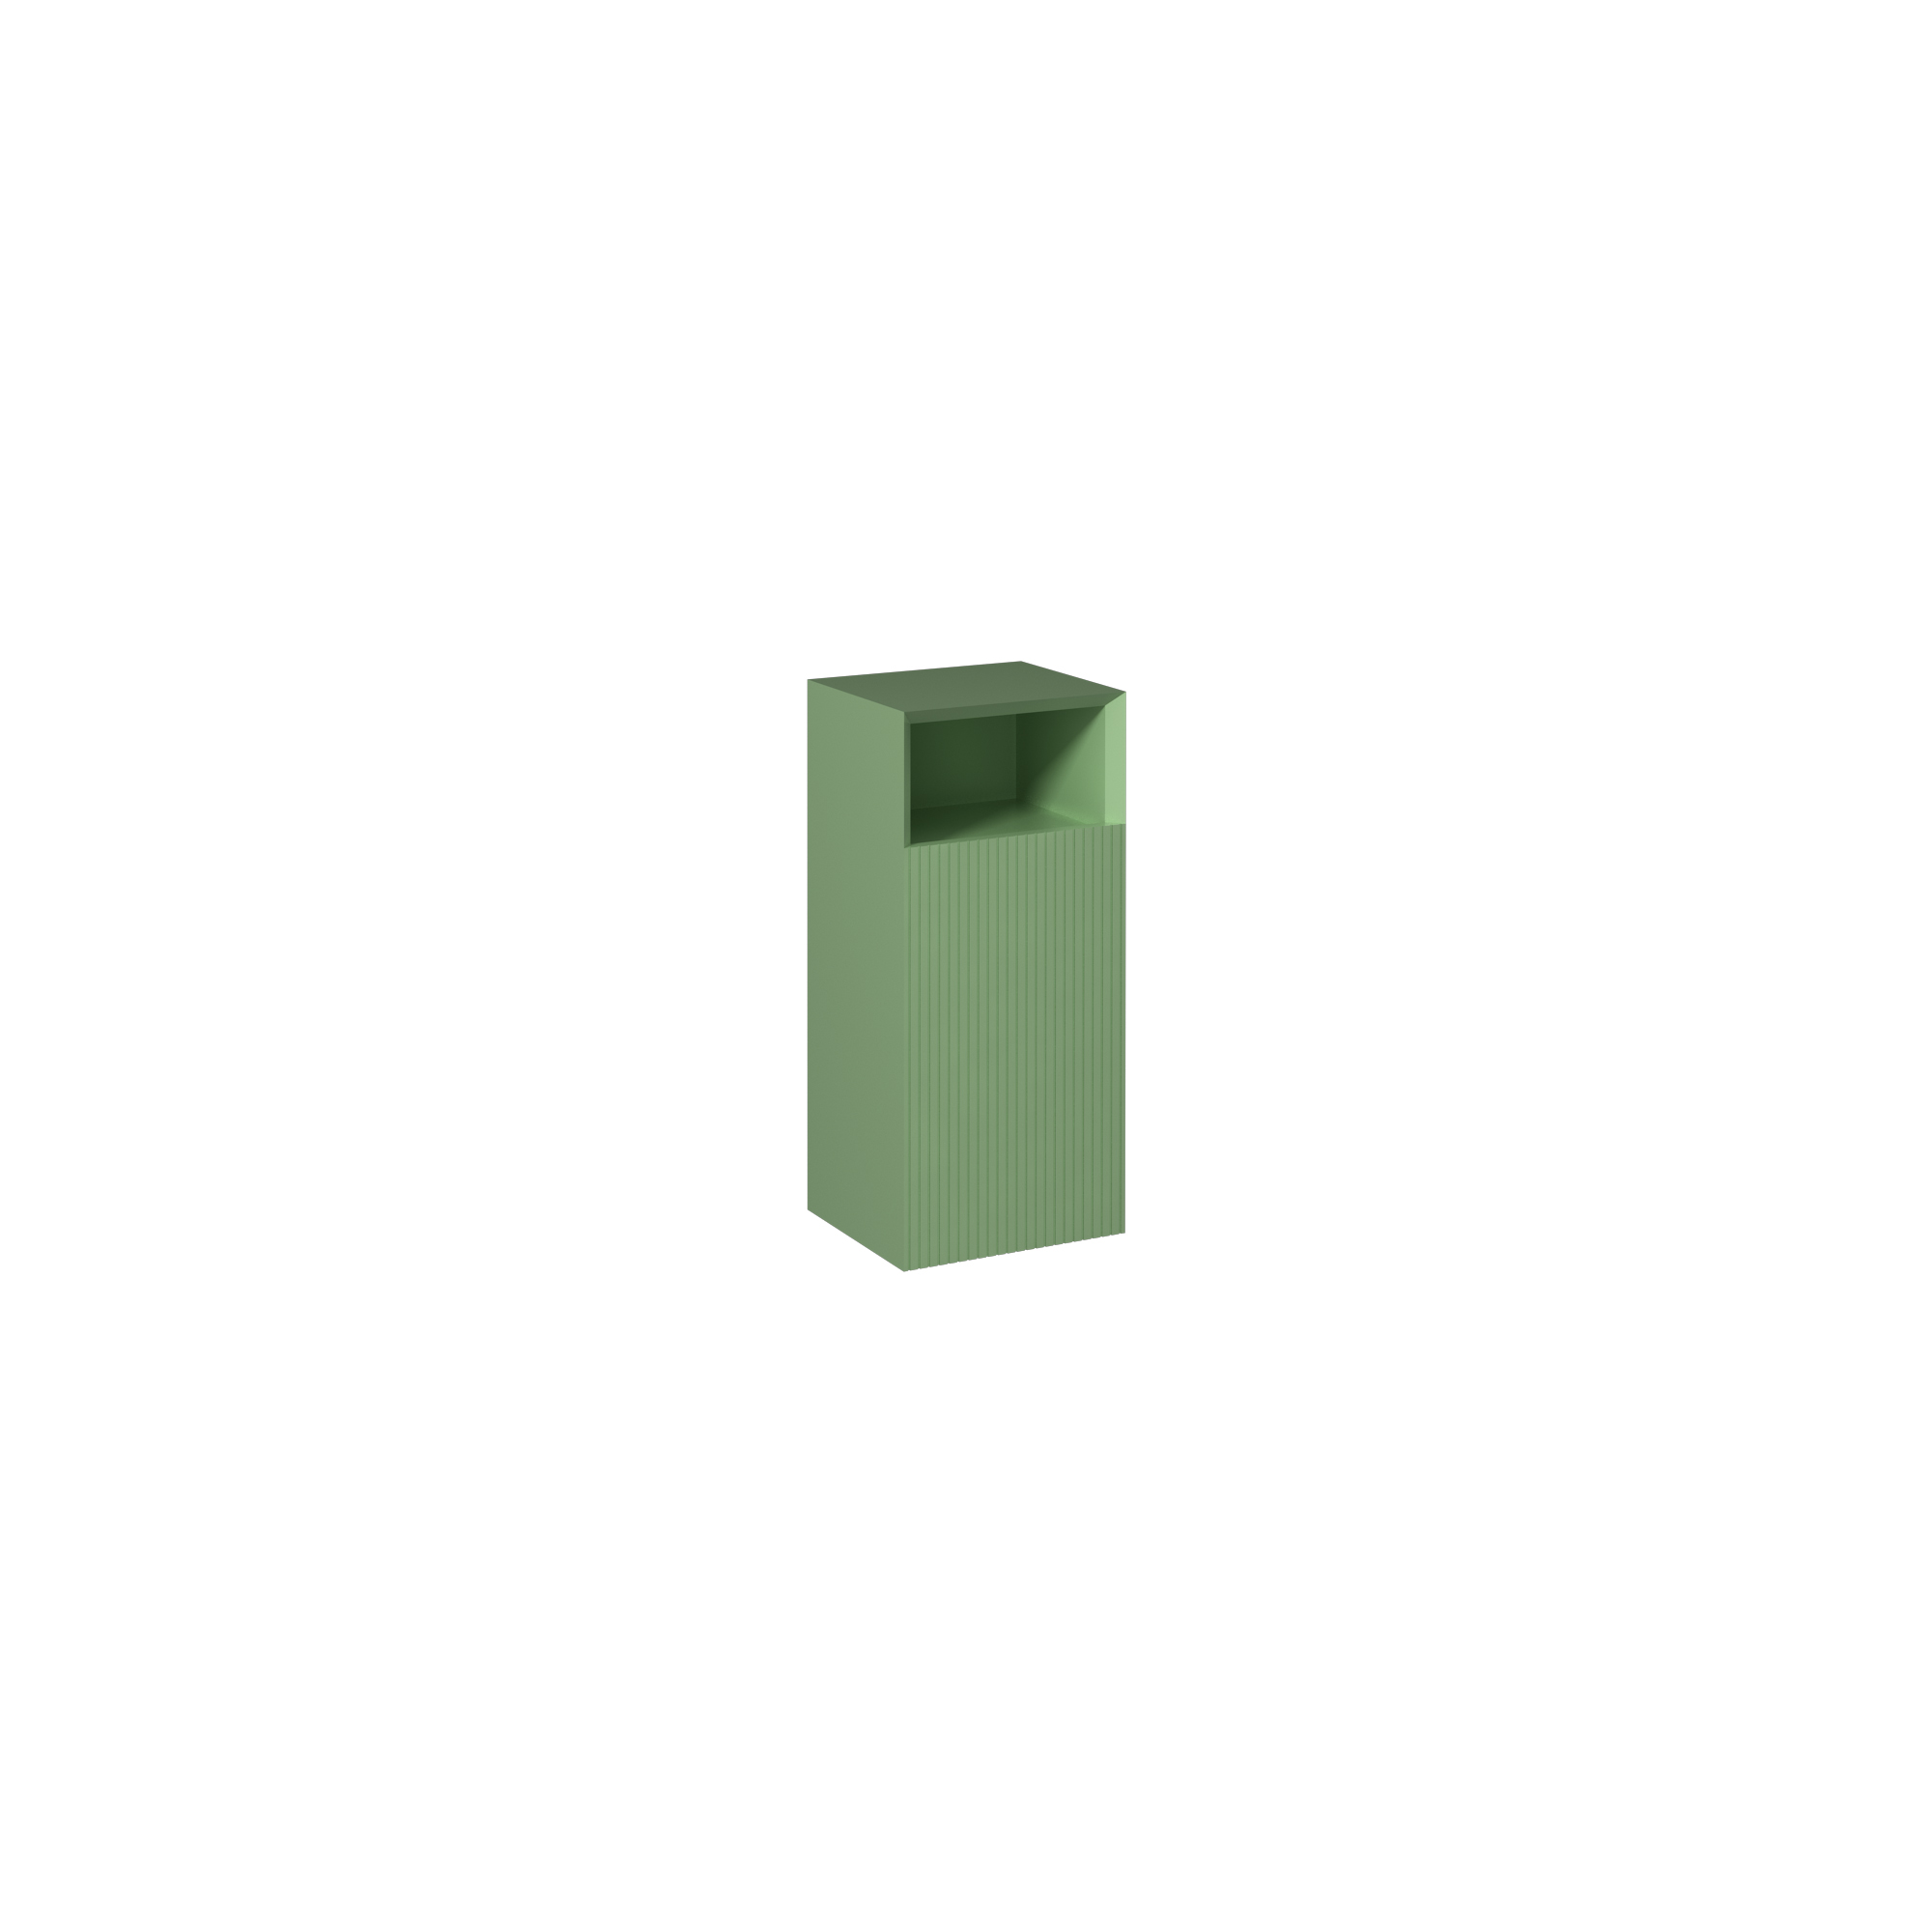 Infinity Tall Cabinet, Pastel Green Right 14"